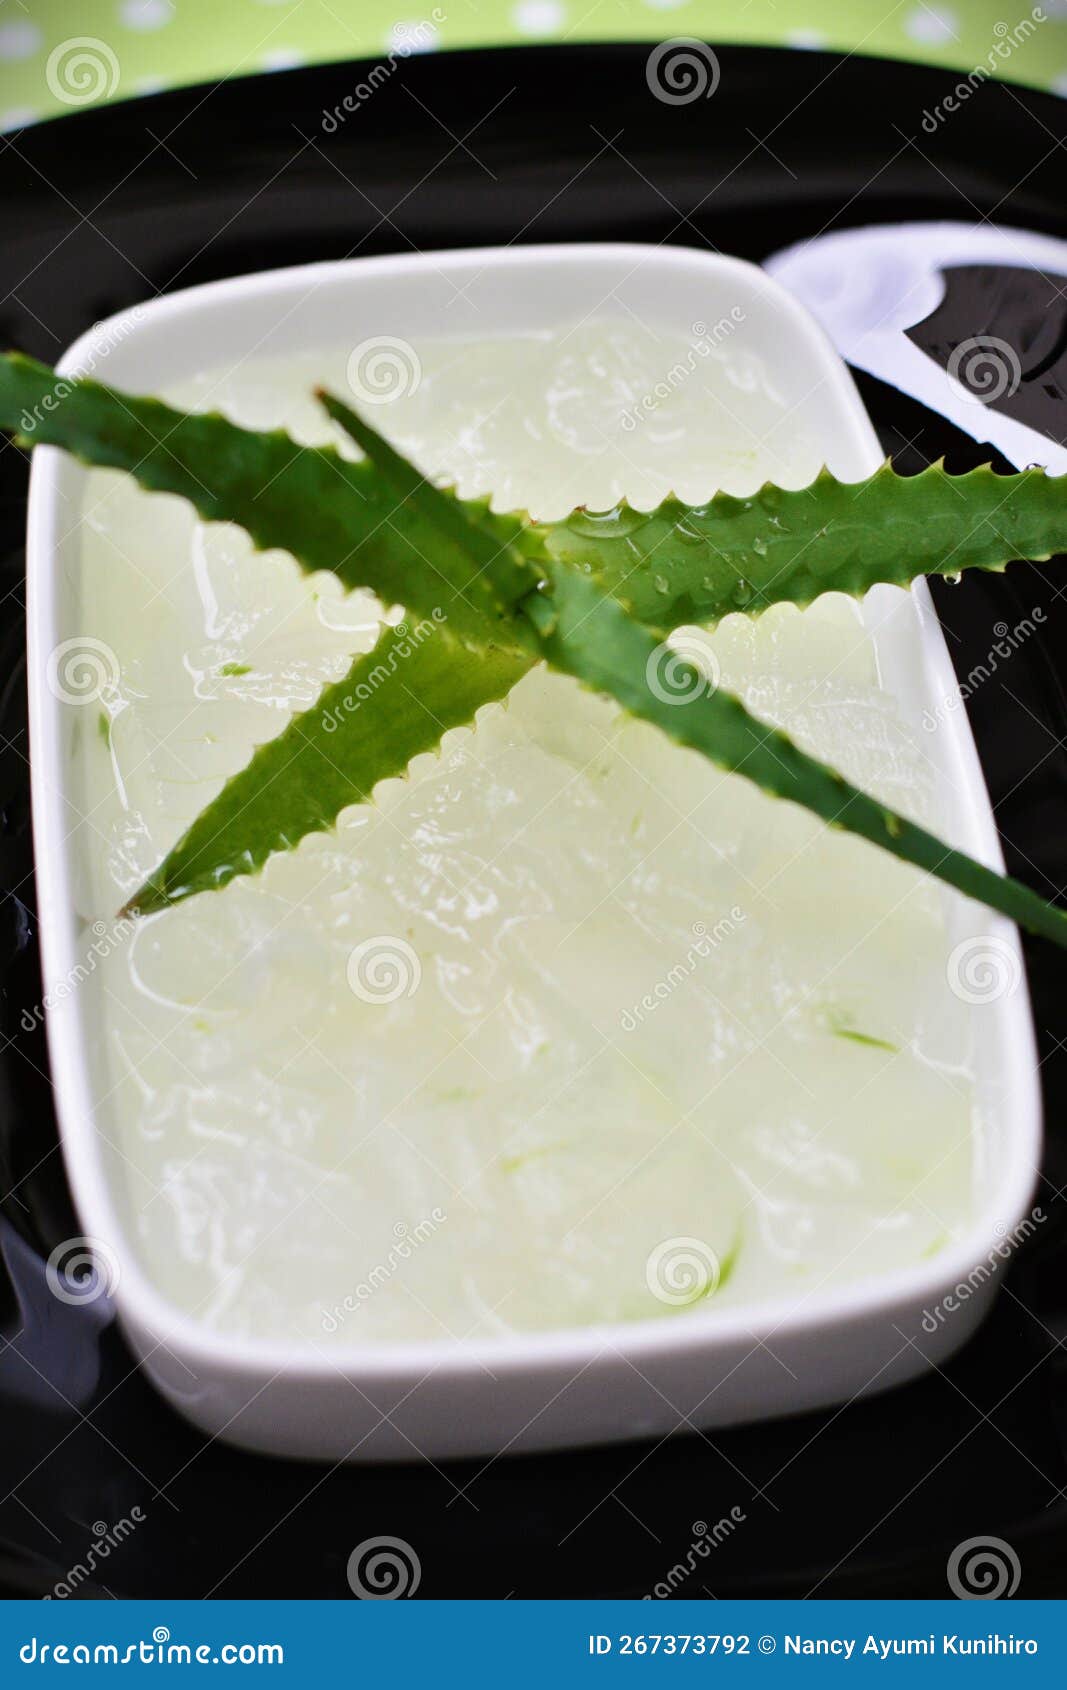 aloe vera and its juice taken from the leaves in the bowl